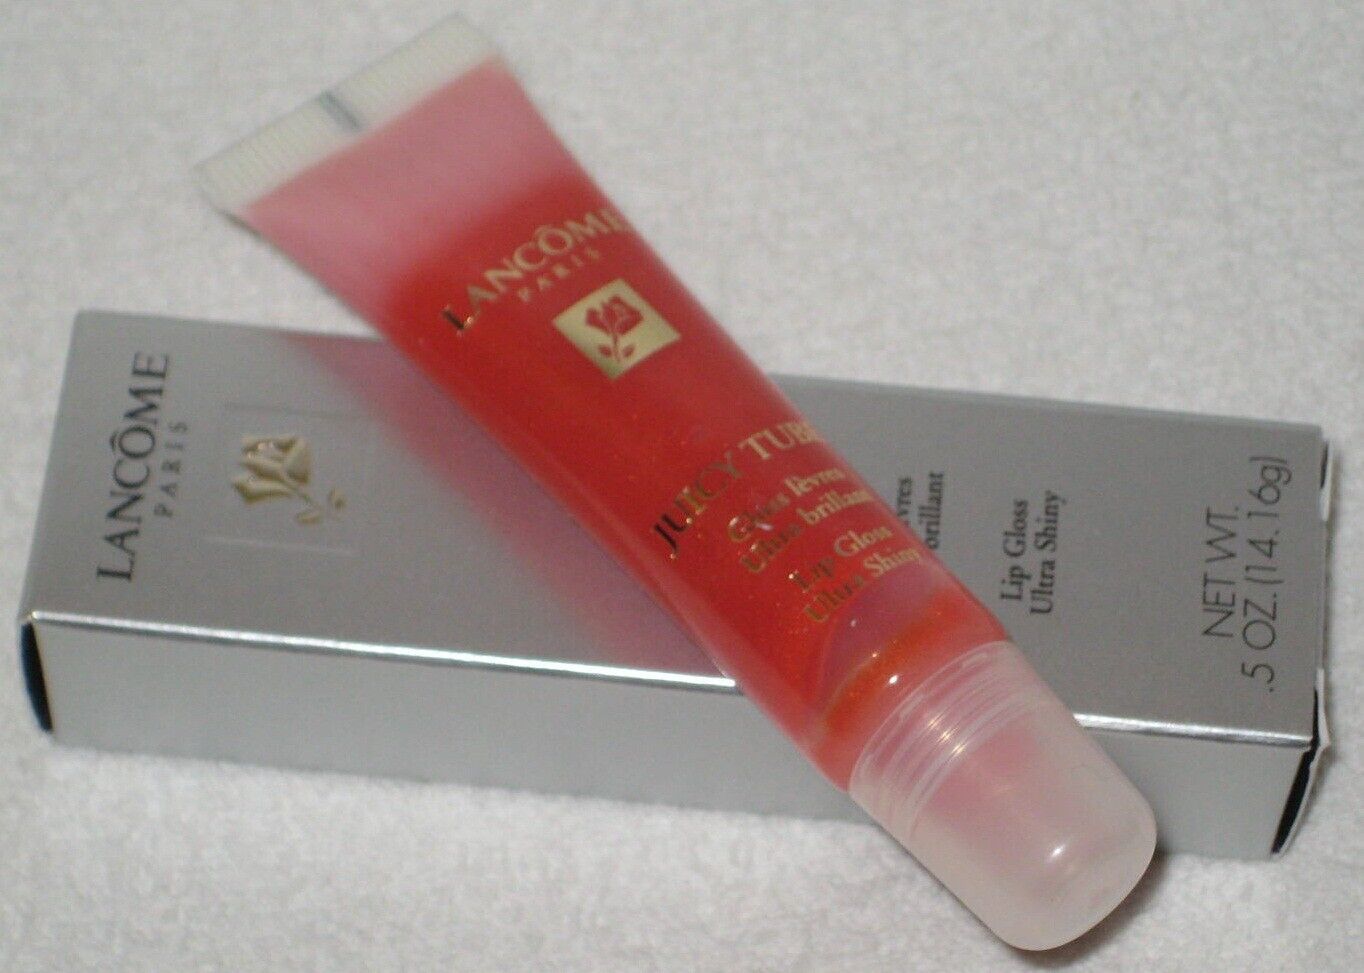 Lancome Juicy Tubes in Bonfire - Full Size - New in Box - $27.50